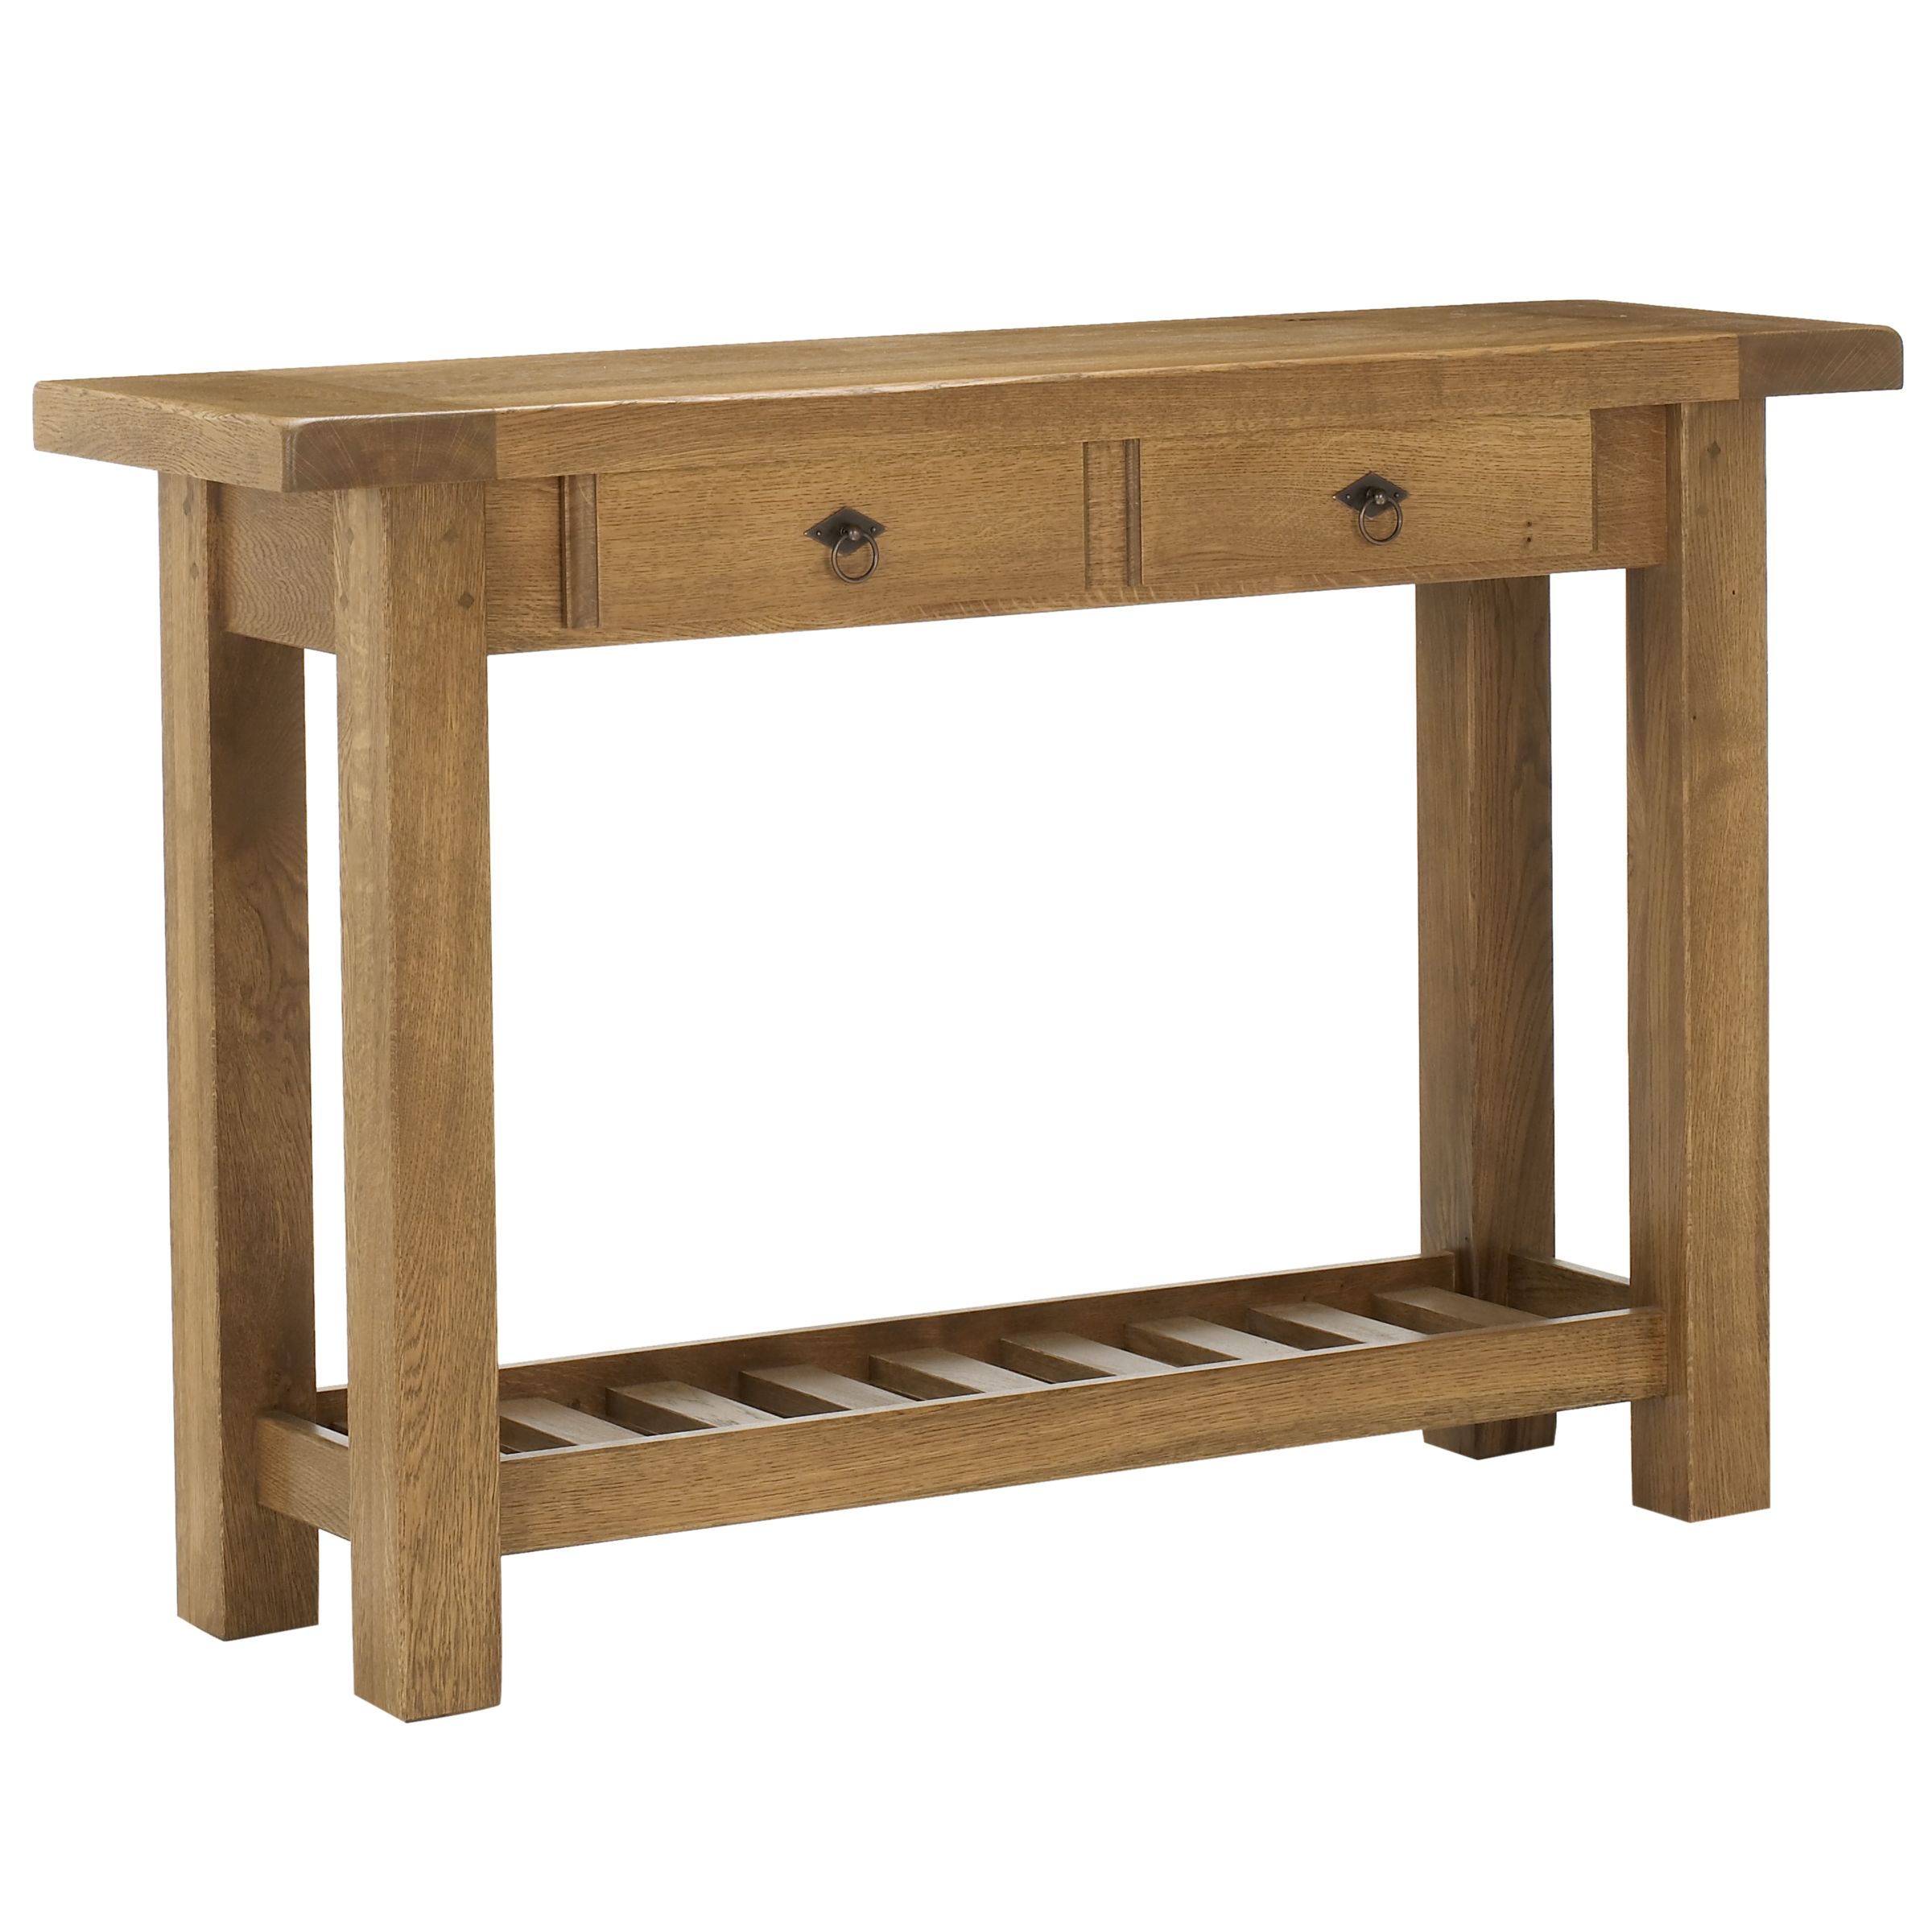 John Lewis Ardenne Console Table with Shelf, Cognac